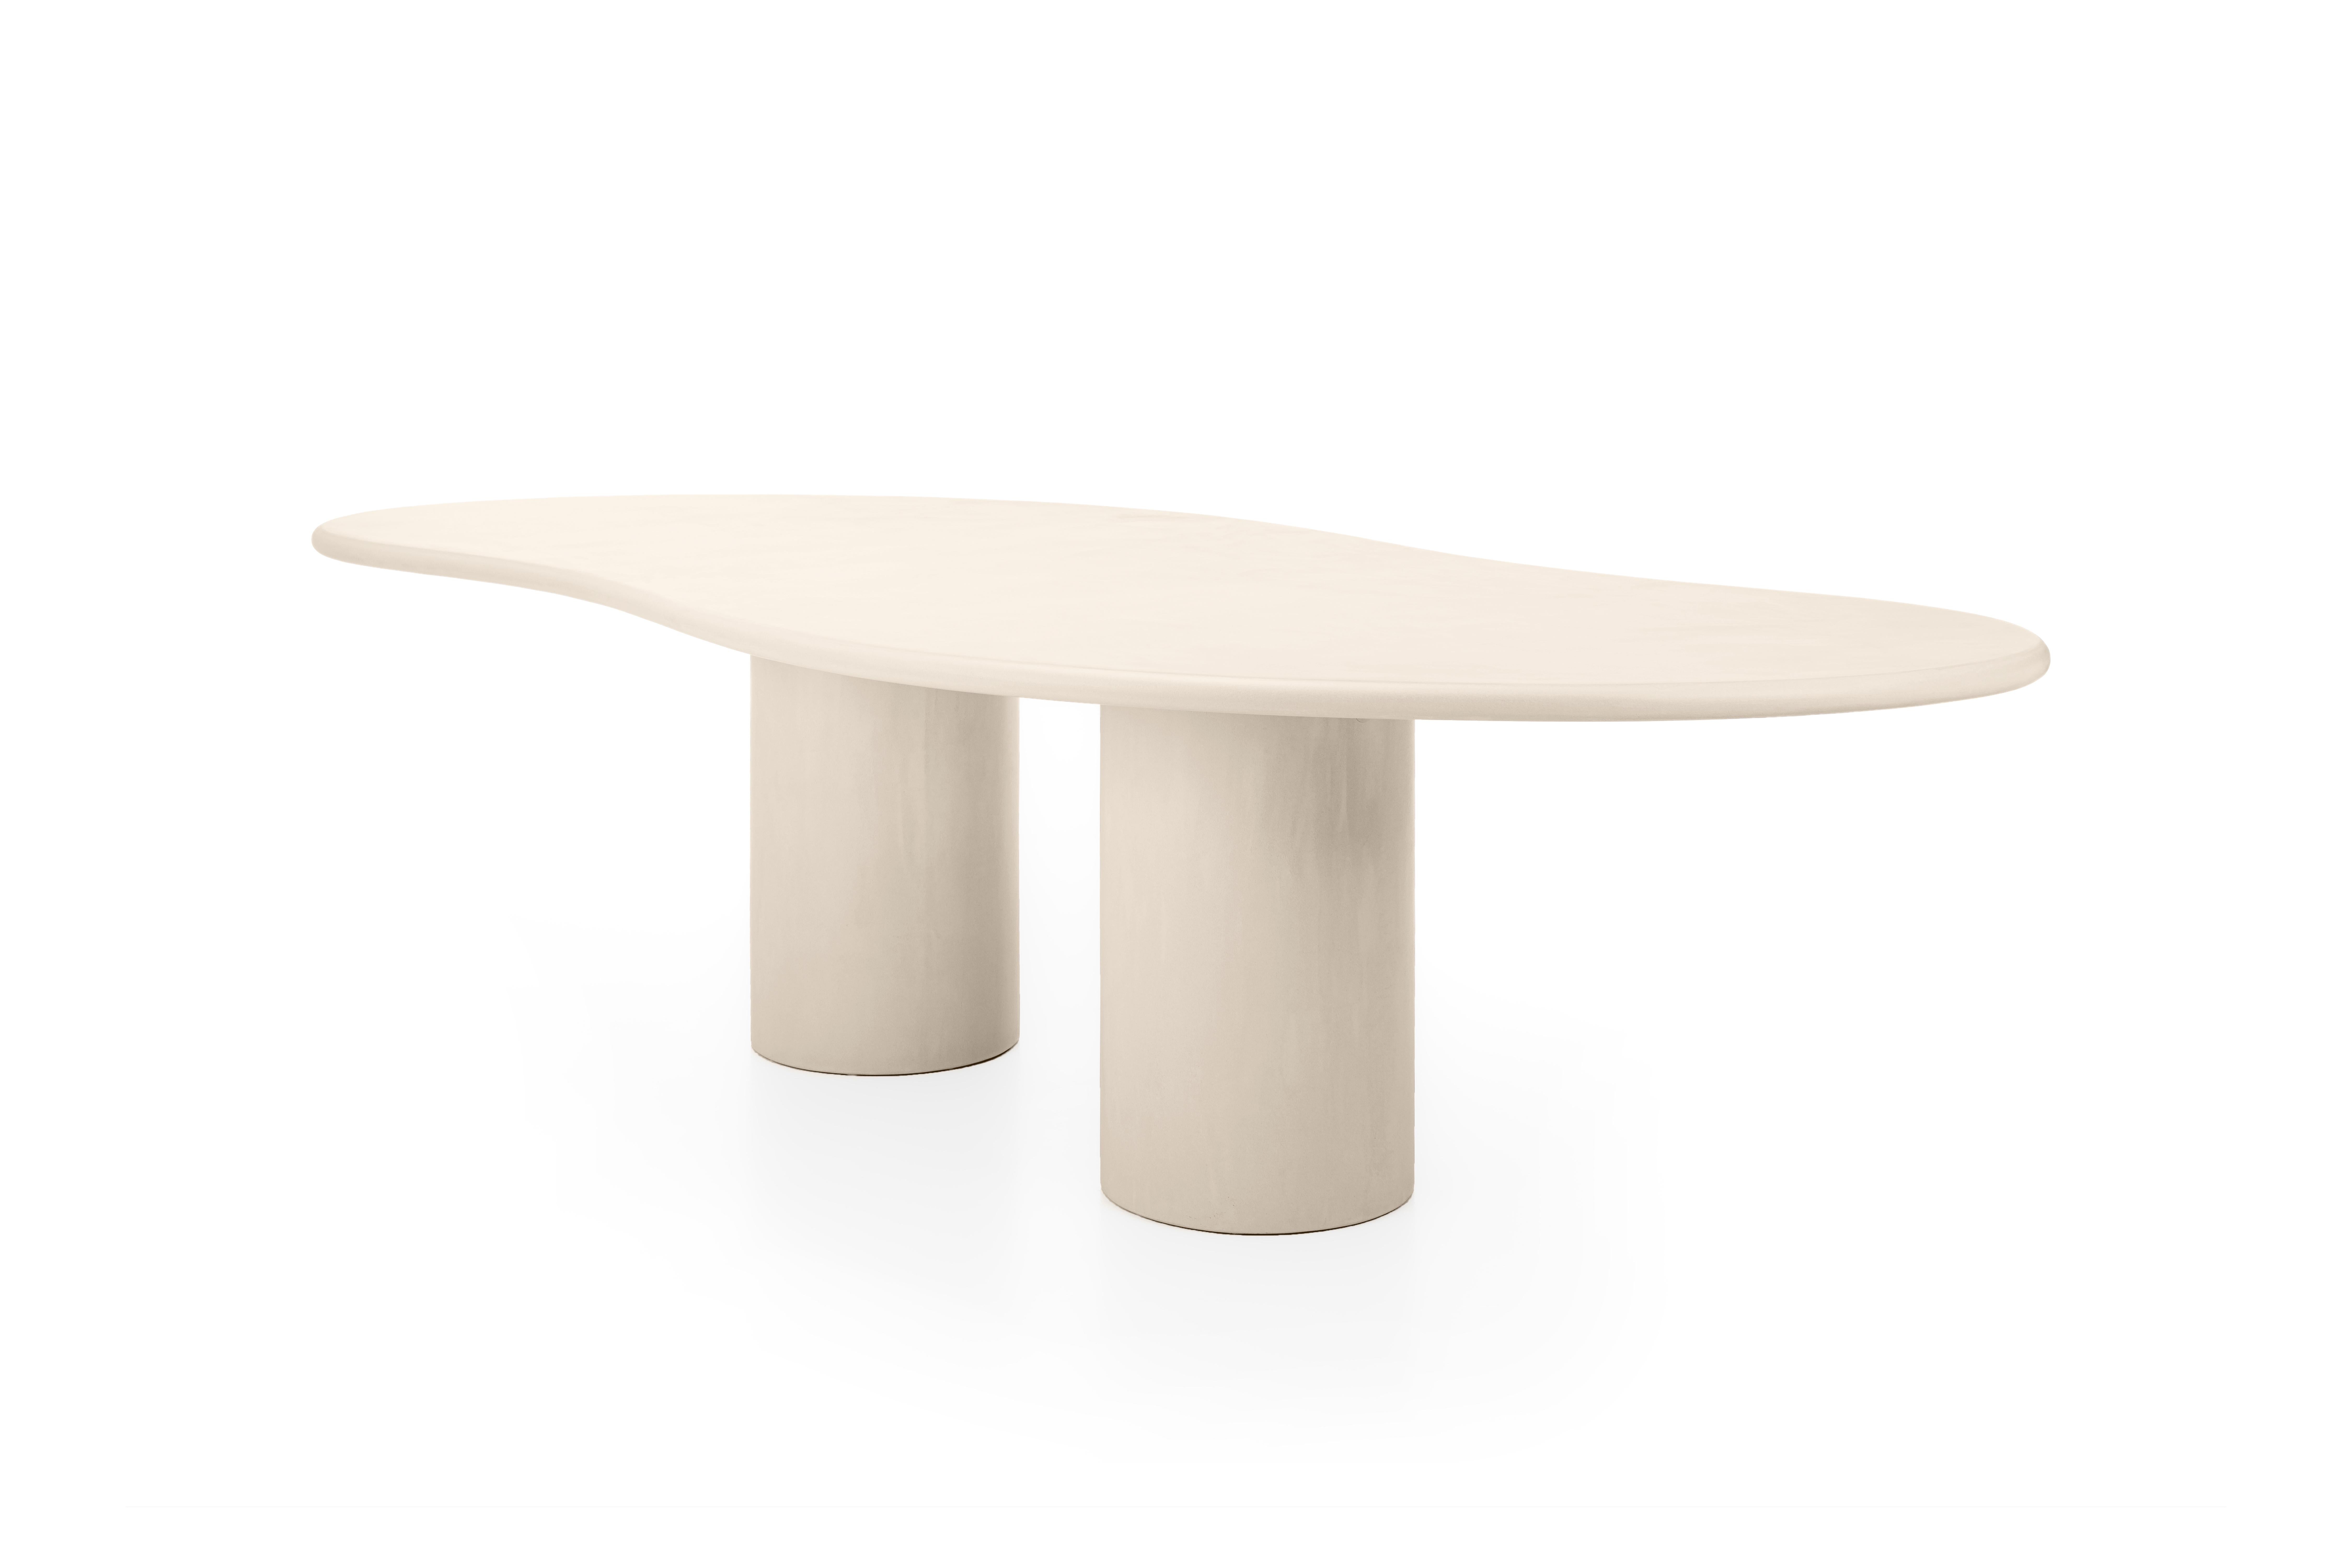 Contemporary Belgian design, handmade natural plaster table with a textured and earthy character.

Indoor use (price outdoor +10%)

Latin adjective “undulatus” / un . du la. tus / : wavy

The Latus dining table is handcrafted with multiple layers